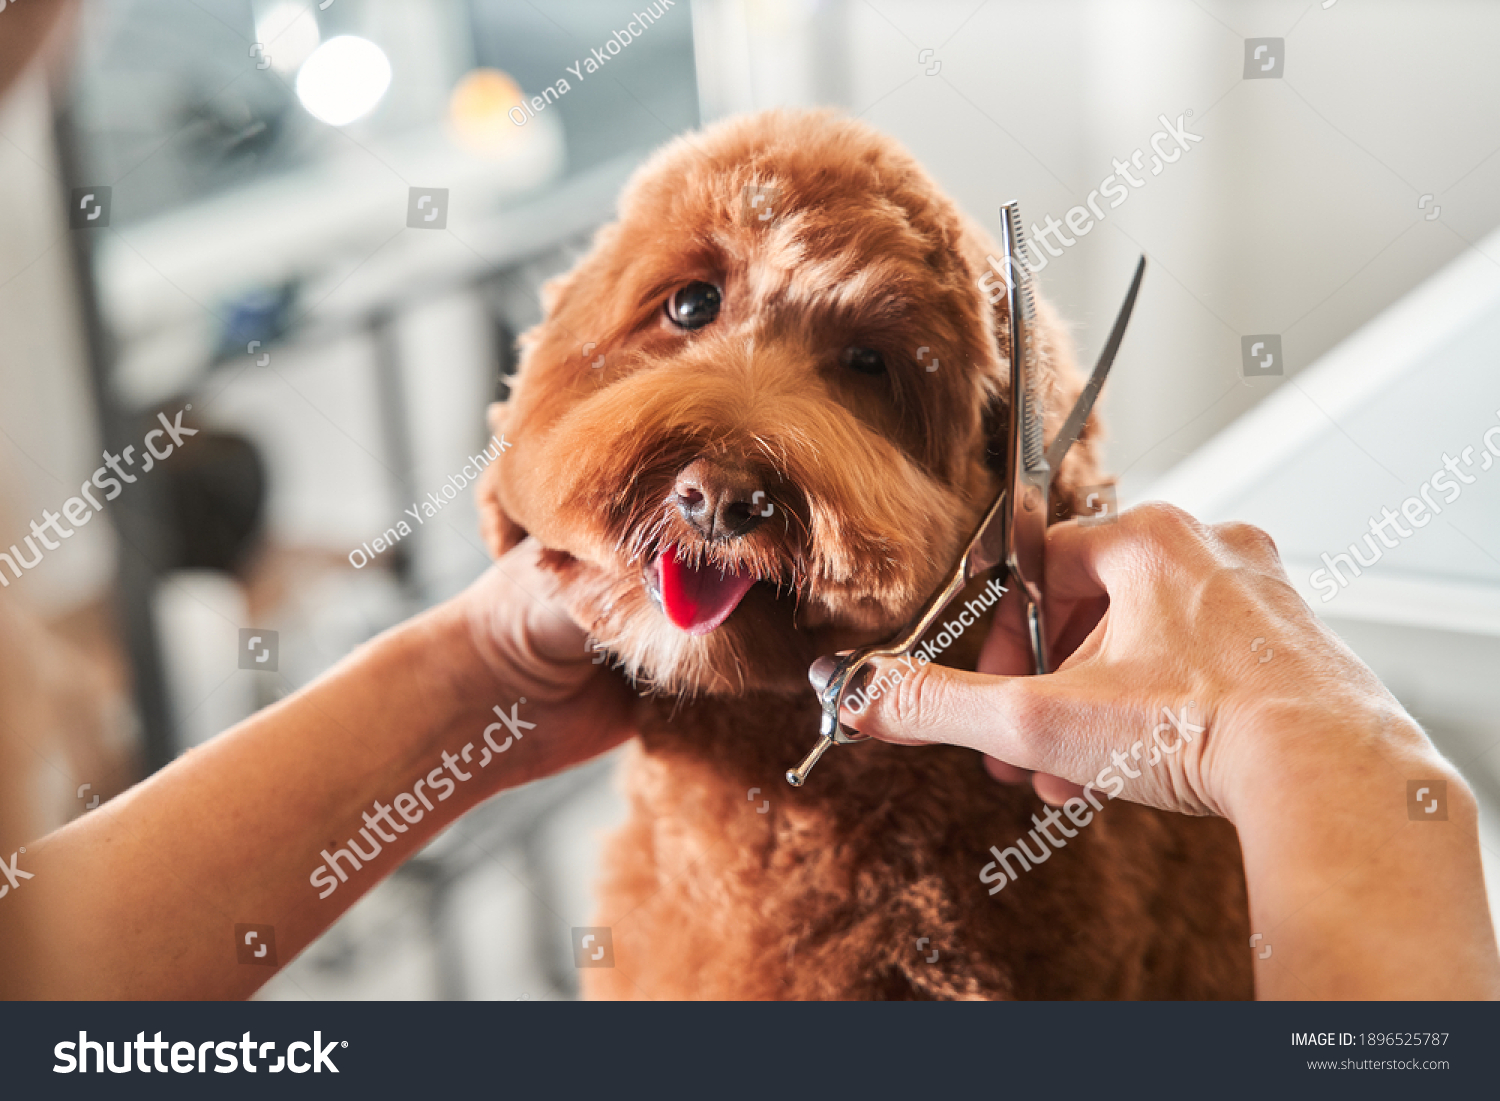 Professional groomer cut fur with scissors and clipper at the little smile dog labradoodle. Funny dog sitting at the grooming salon or vet clinic and looked trustingly #1896525787